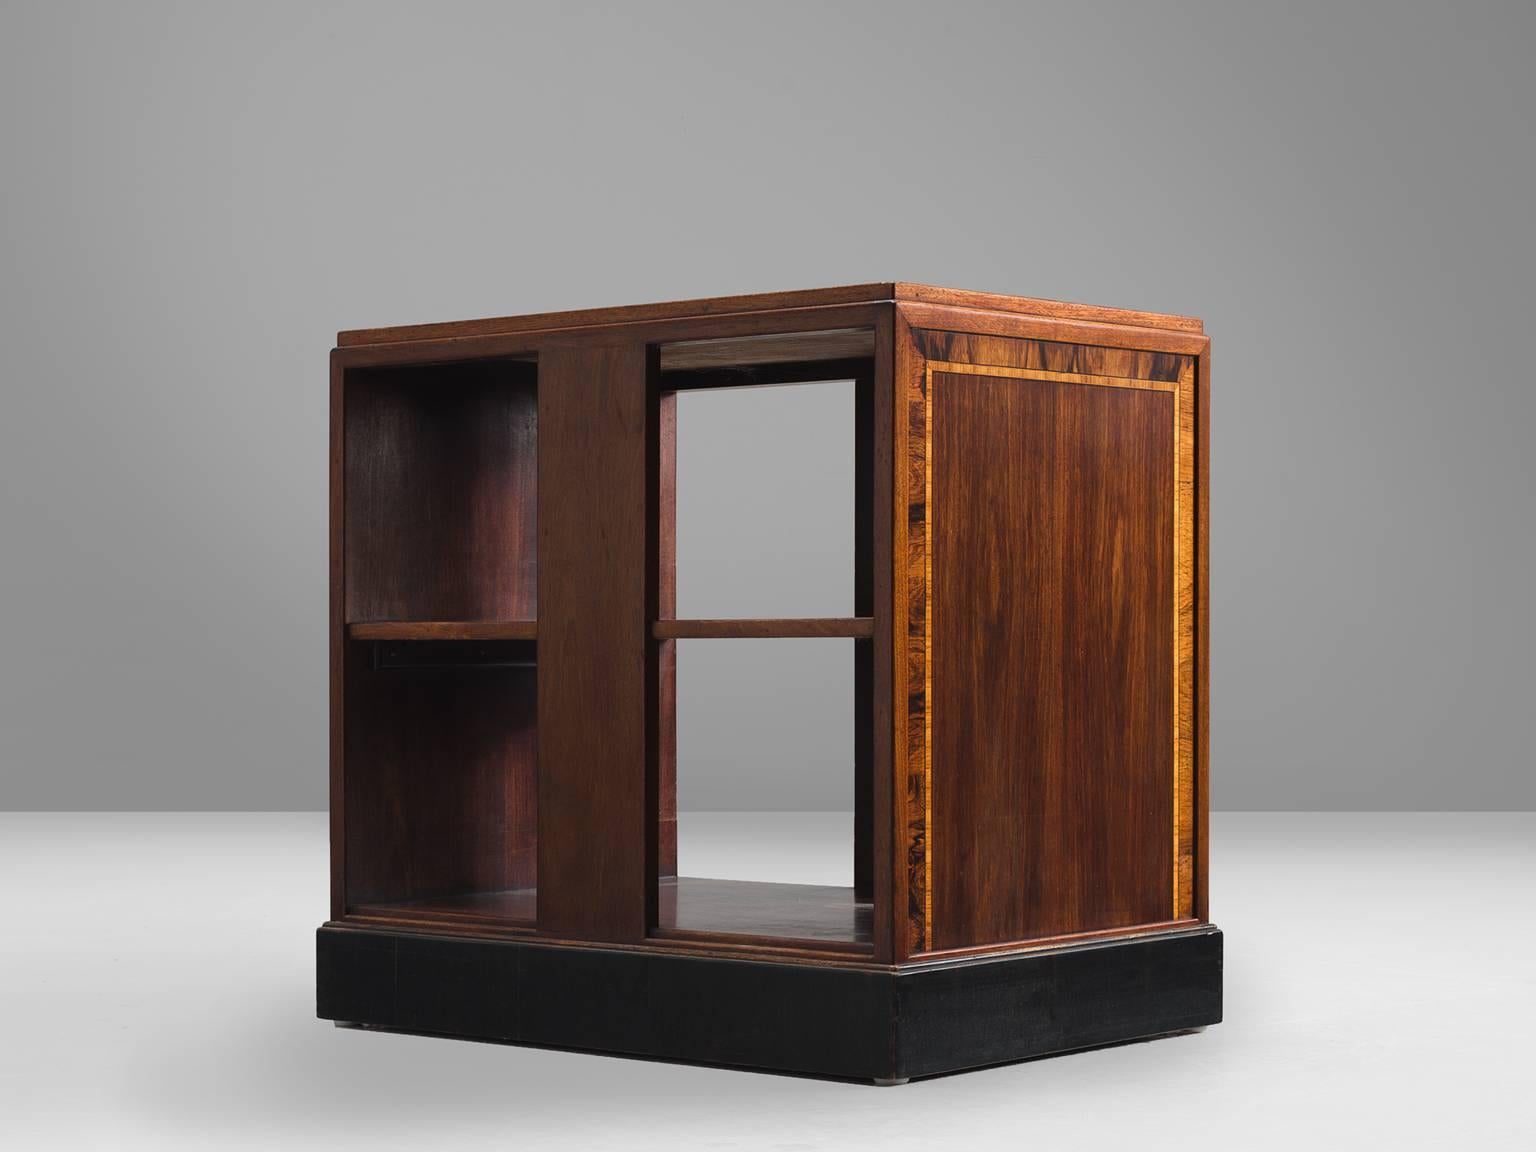 Showcase, mahogany, rosewood, walnut, Europe, 1950s.

This small, square cabinet features different inlays of wood. The main cabinet is made out of mahogany but the side are very decorative and graphic and the border is executed in cocobolo and the